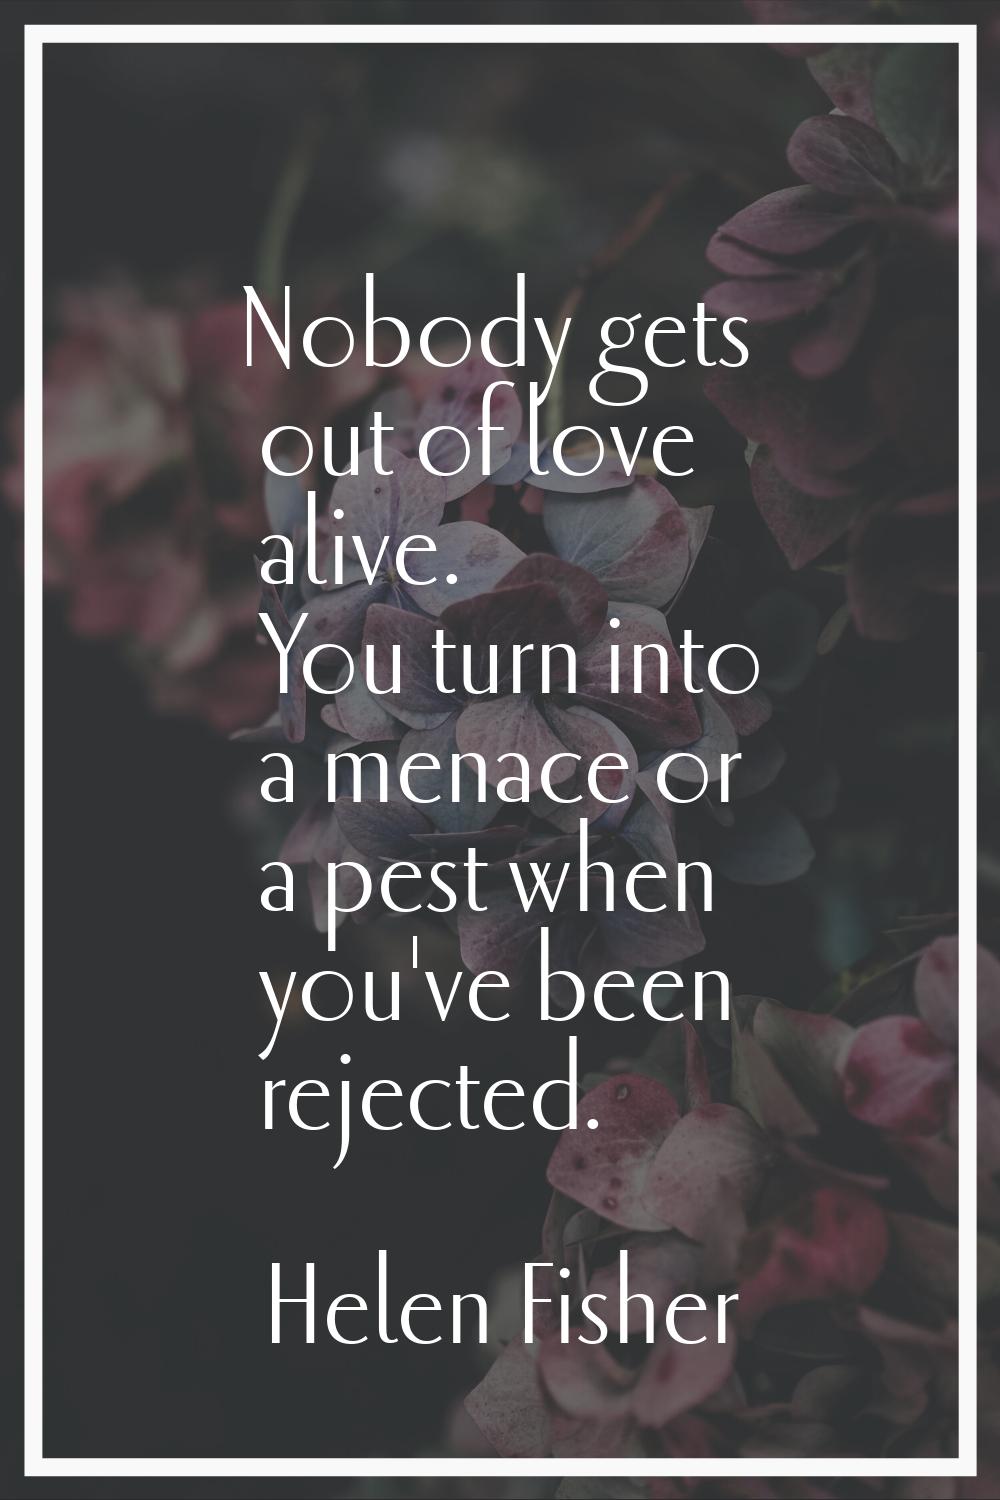 Nobody gets out of love alive. You turn into a menace or a pest when you've been rejected.